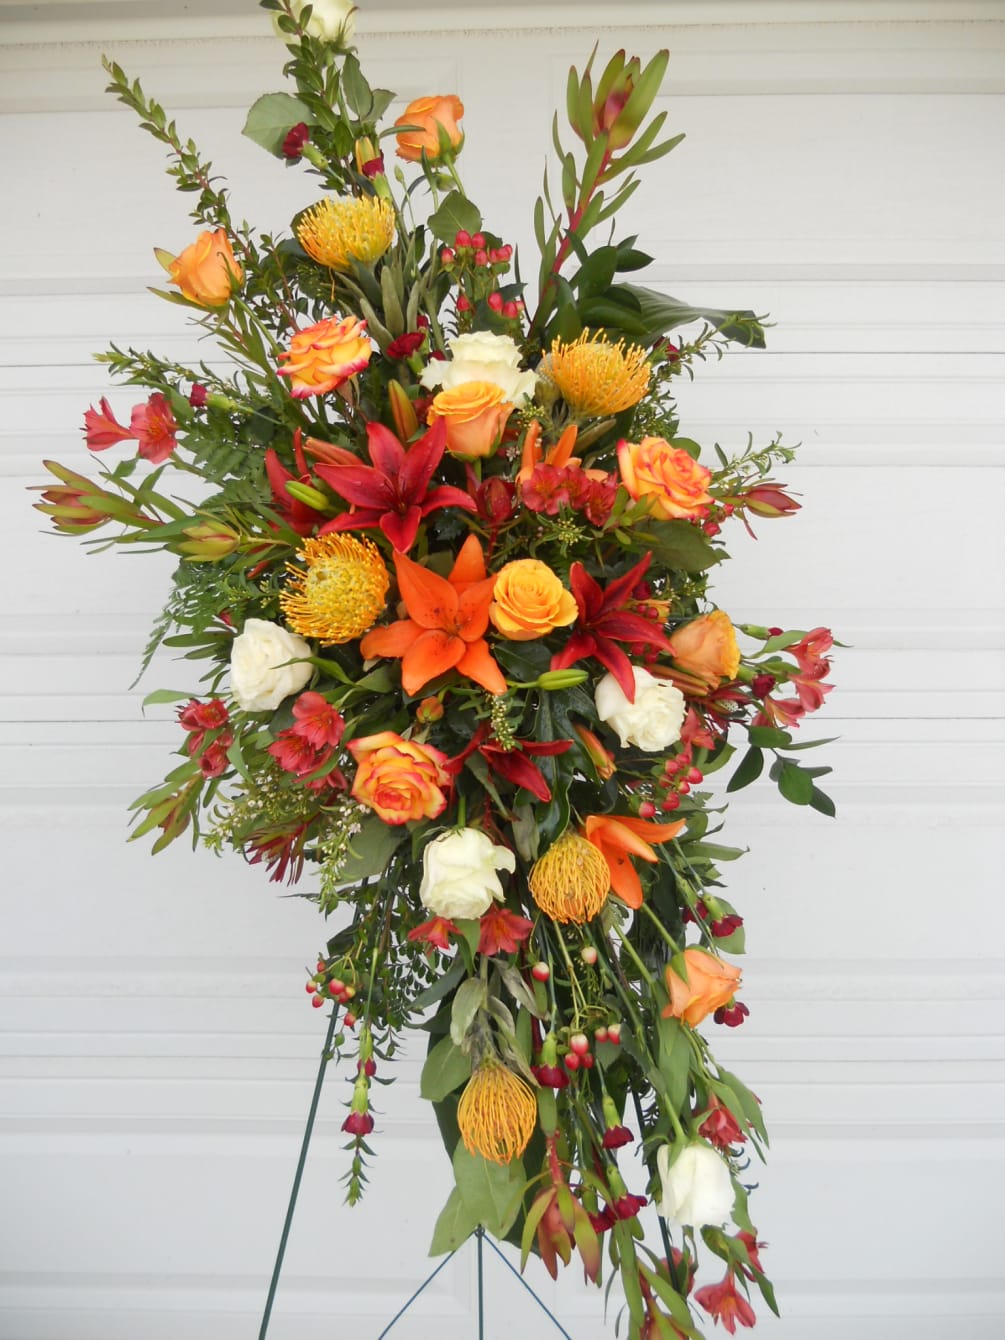 This Tribute for a man features Pin Cushion protea, lilies and roses.